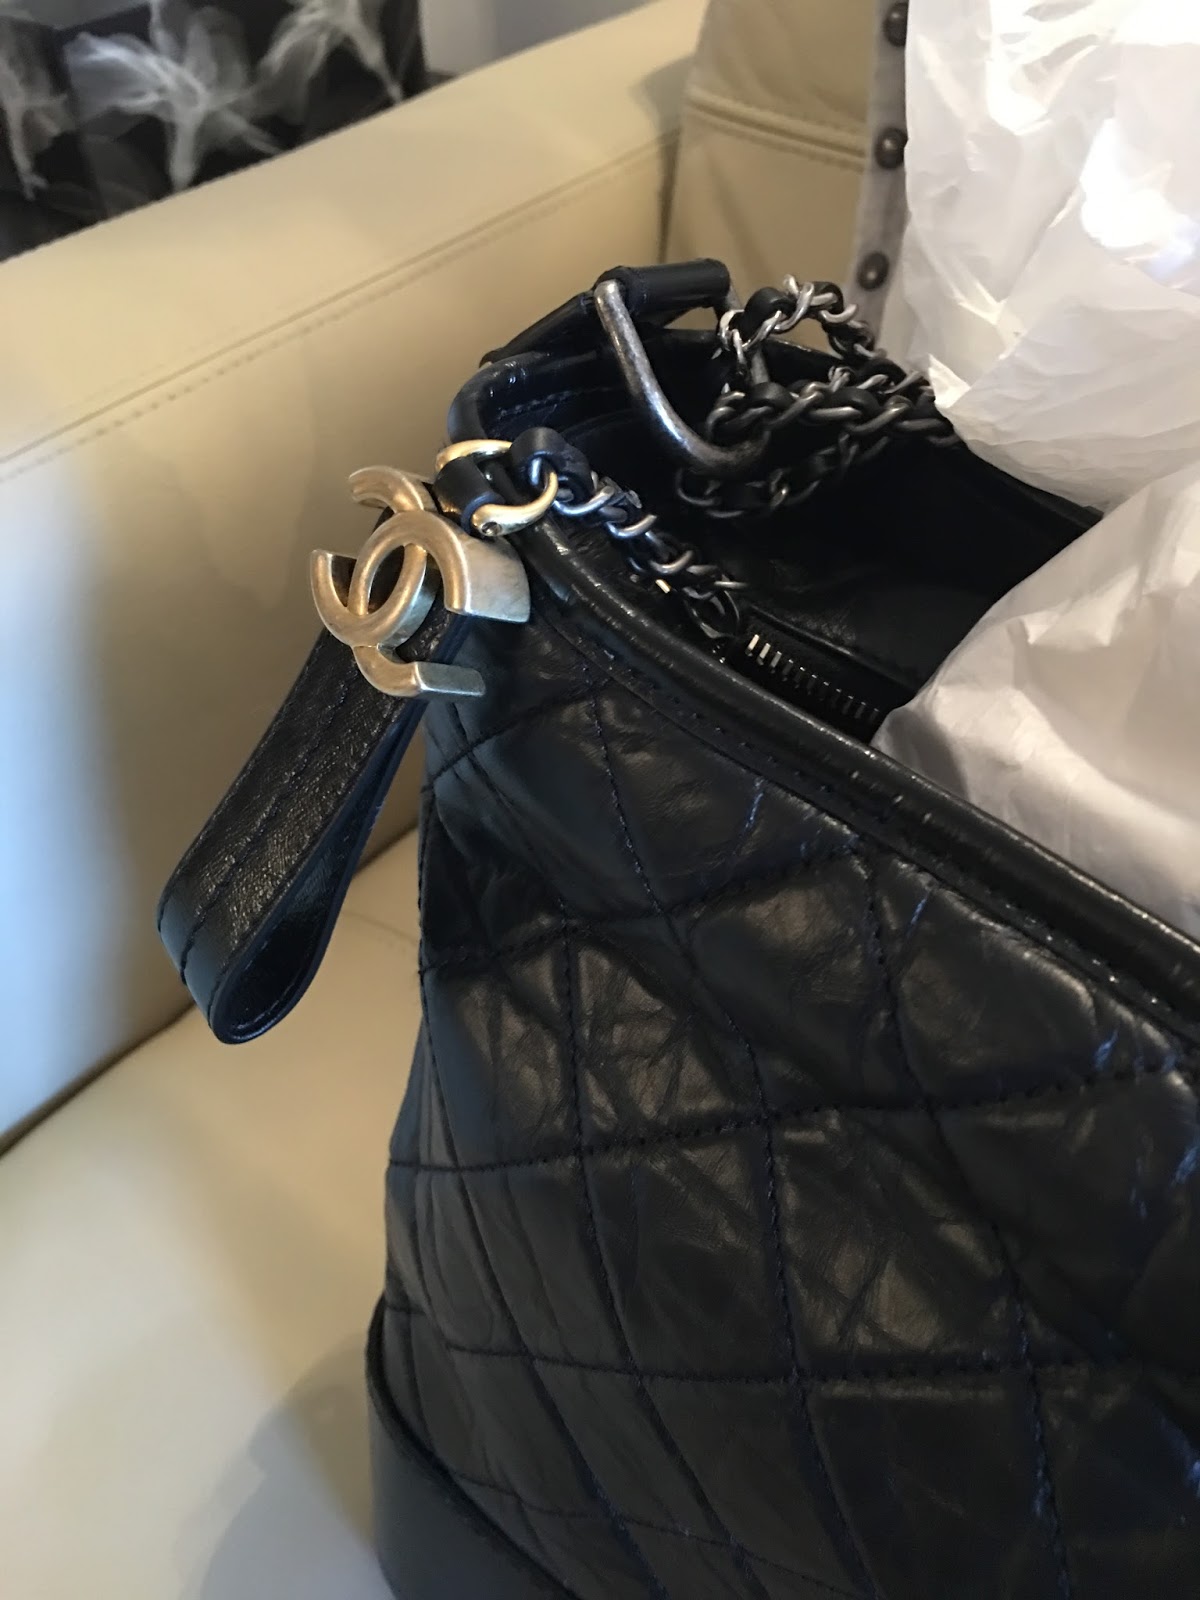 CHANEL GABRIELLE BACKPACK WEAR AND TEAR UPDATE!!!!! 